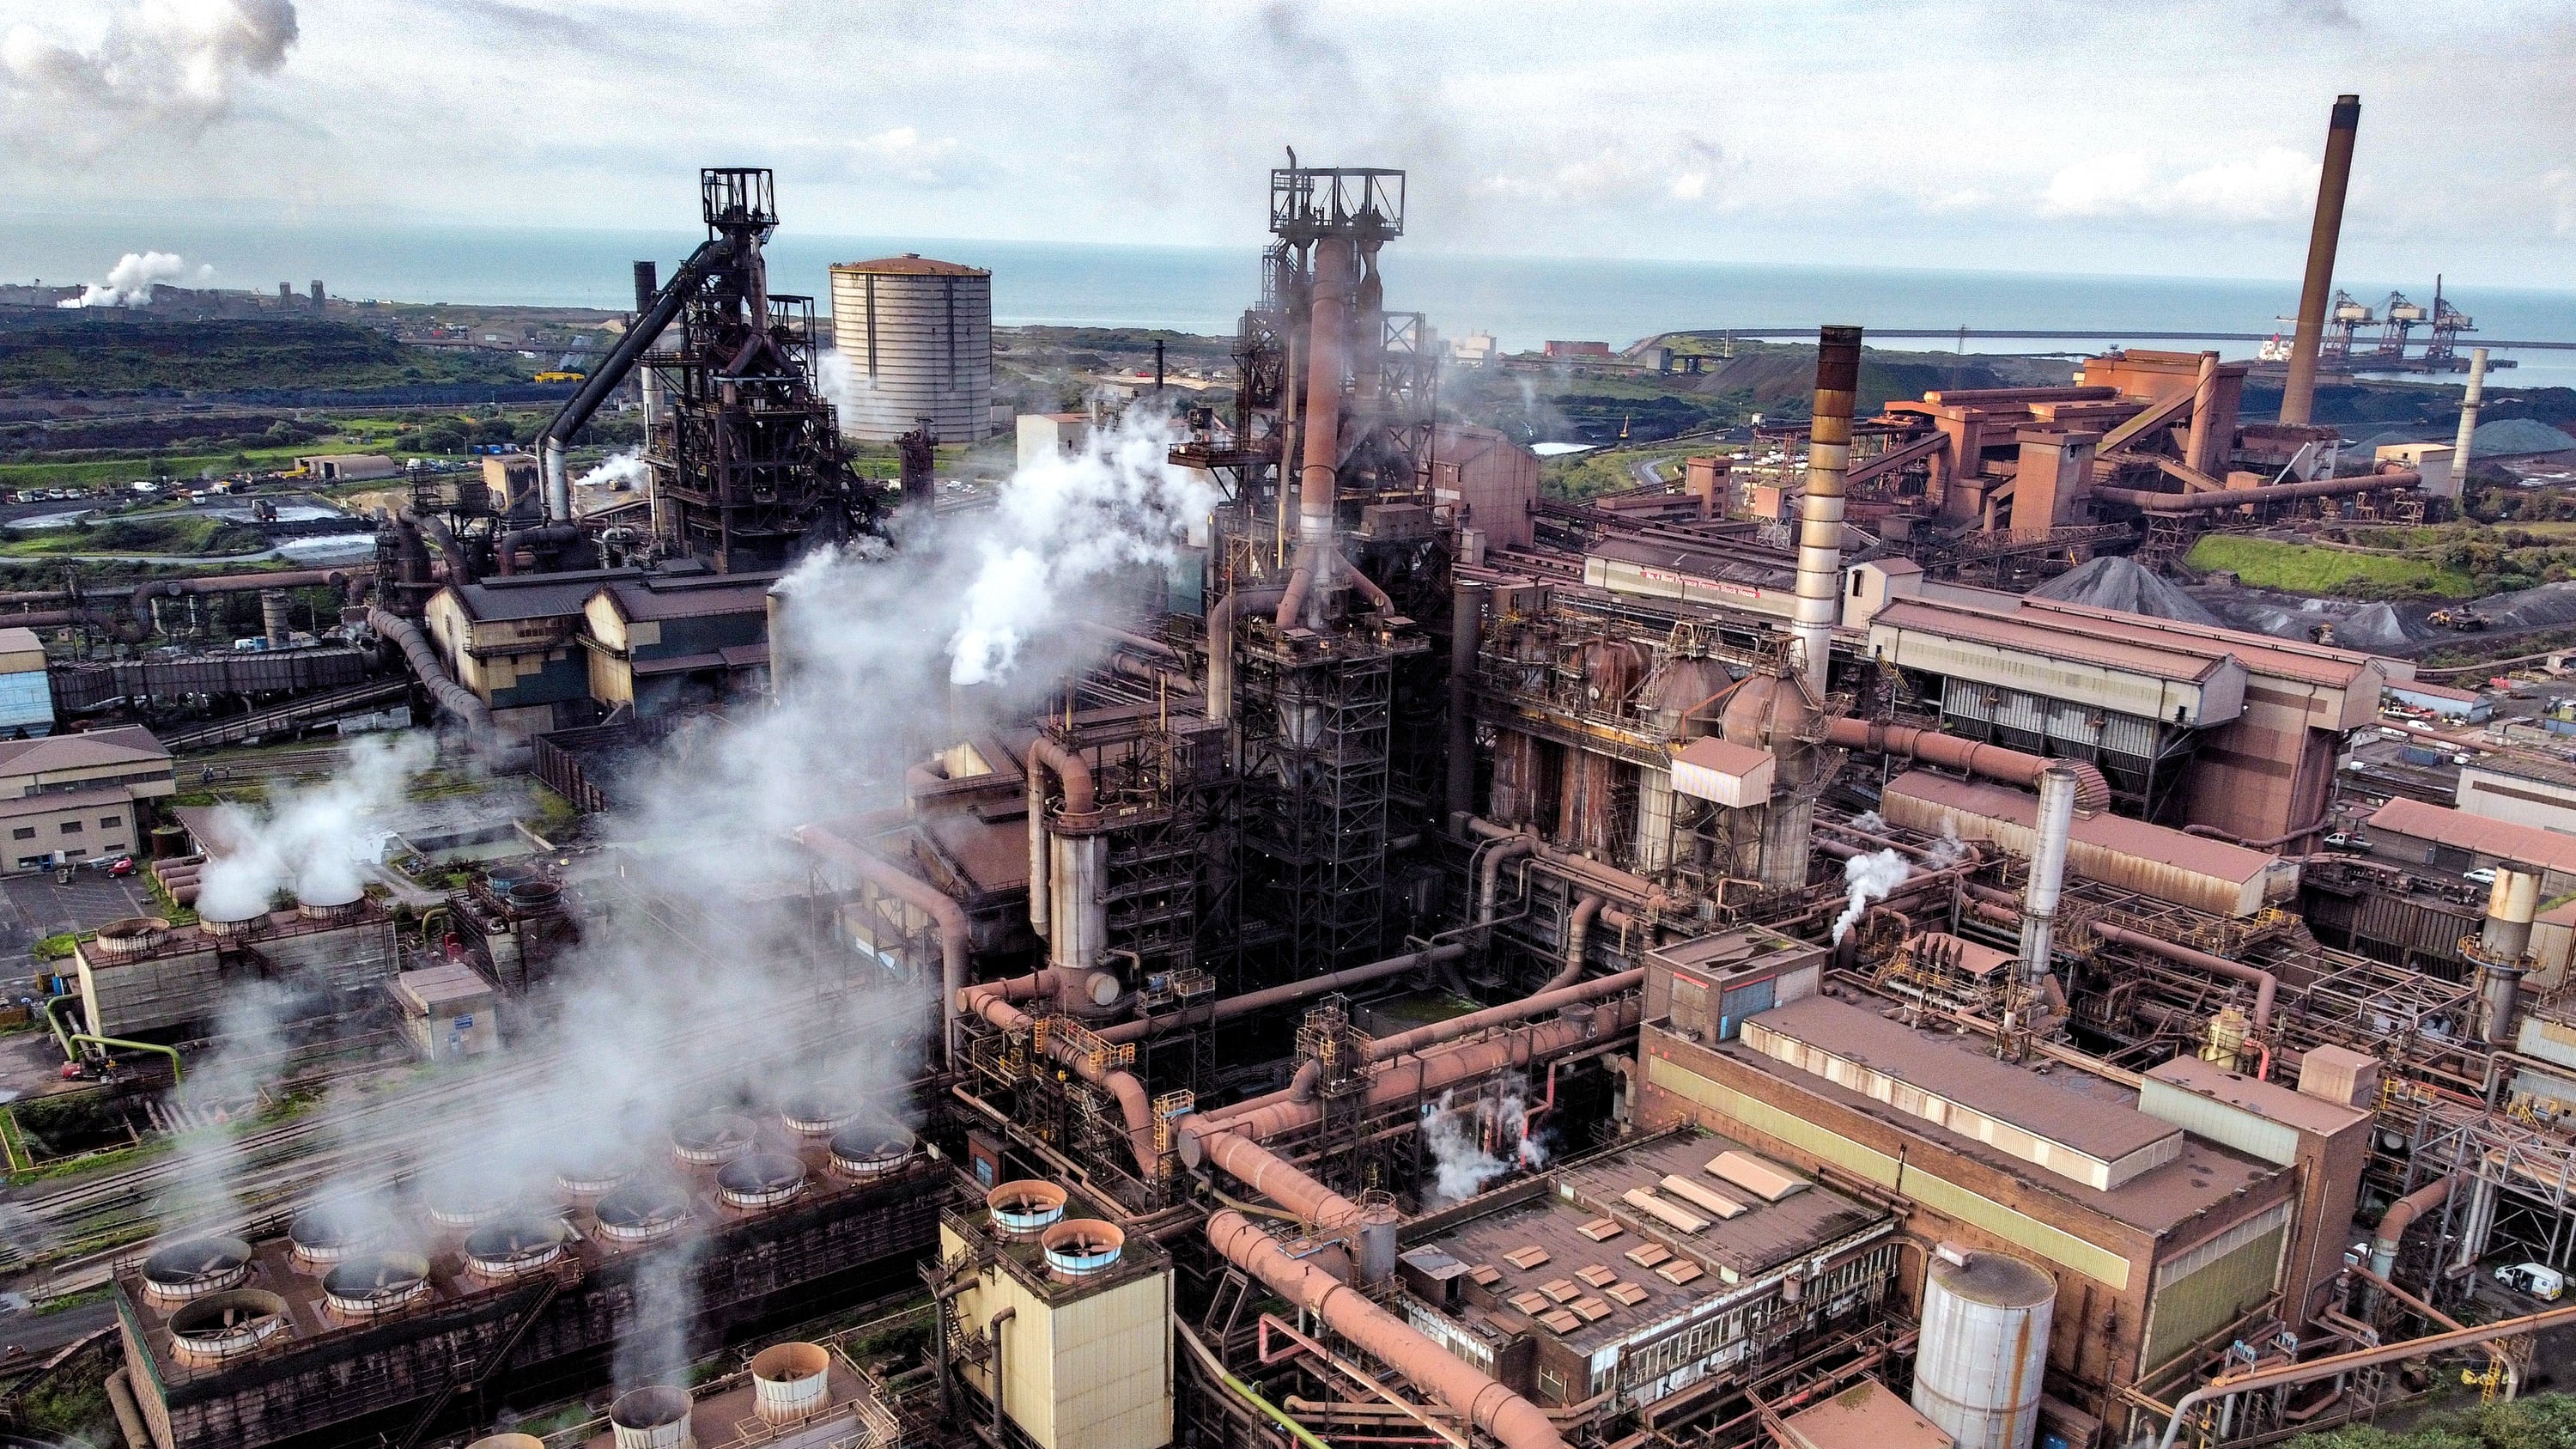 The decommissioning of Blast Furnace 5 started immediately after the last liquid iron was produced on Thursday